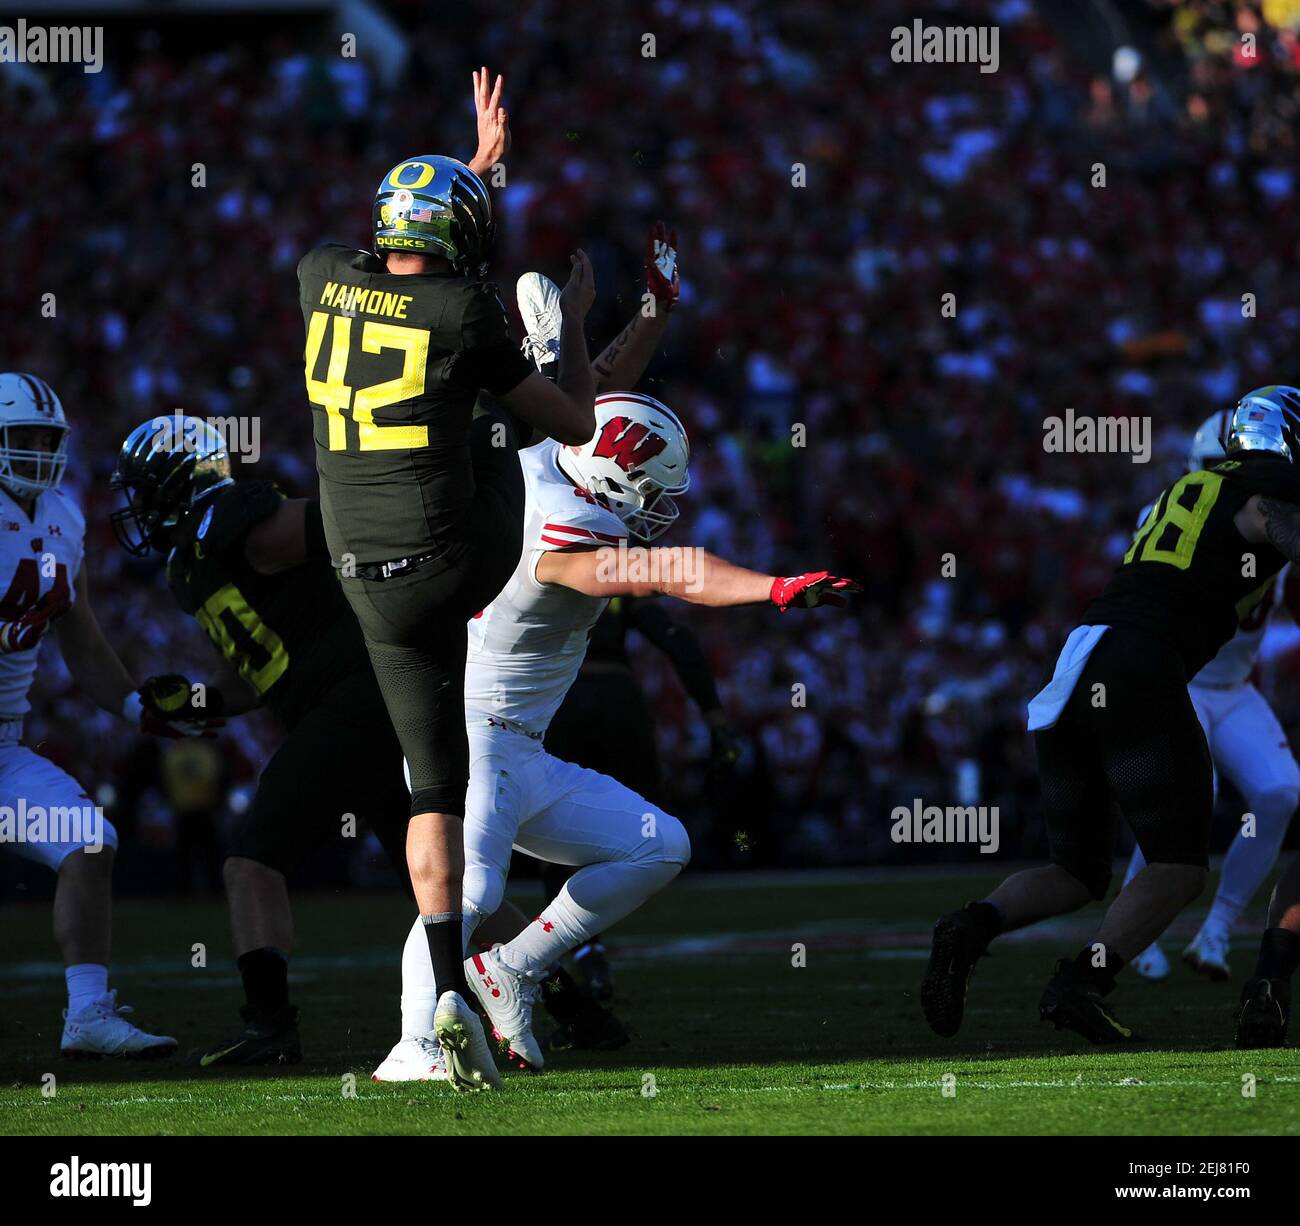 January 01, 2020: Oregon Ducks safety Nick Pickett #16 during the 2019 Rose  Bowl game between the Oregon Ducks and the Wisconsin Badgers at the Rose  Bowl Stadium in Pasadena, CA. John